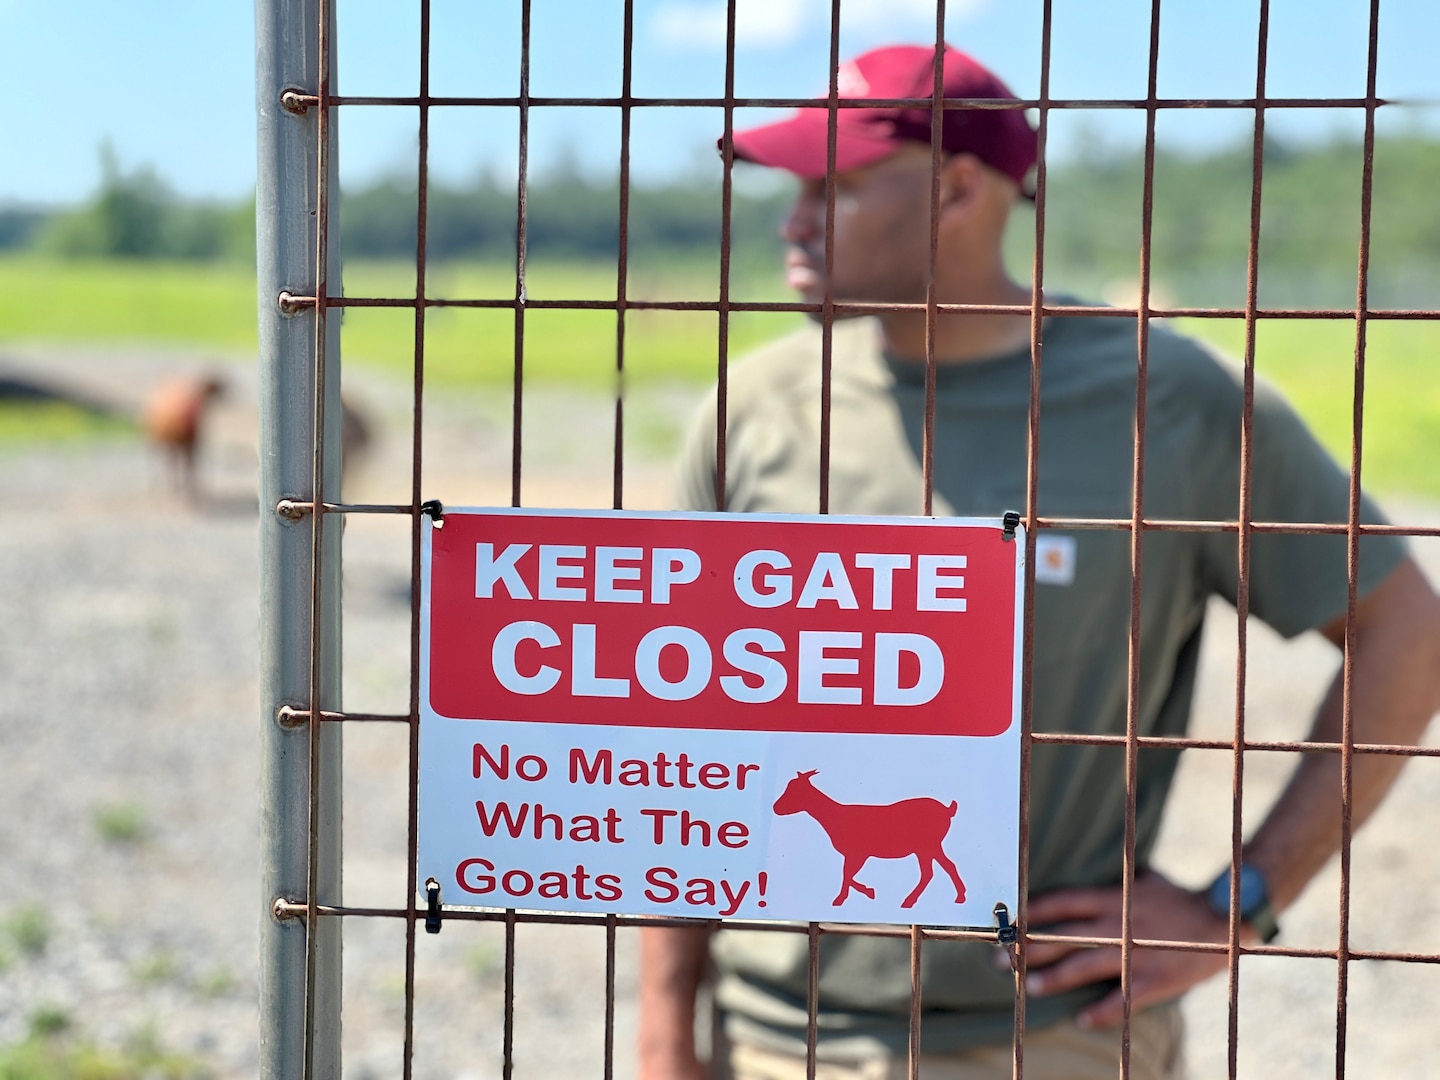 "Keep Gate Closed" sign on a fence in front of a man.